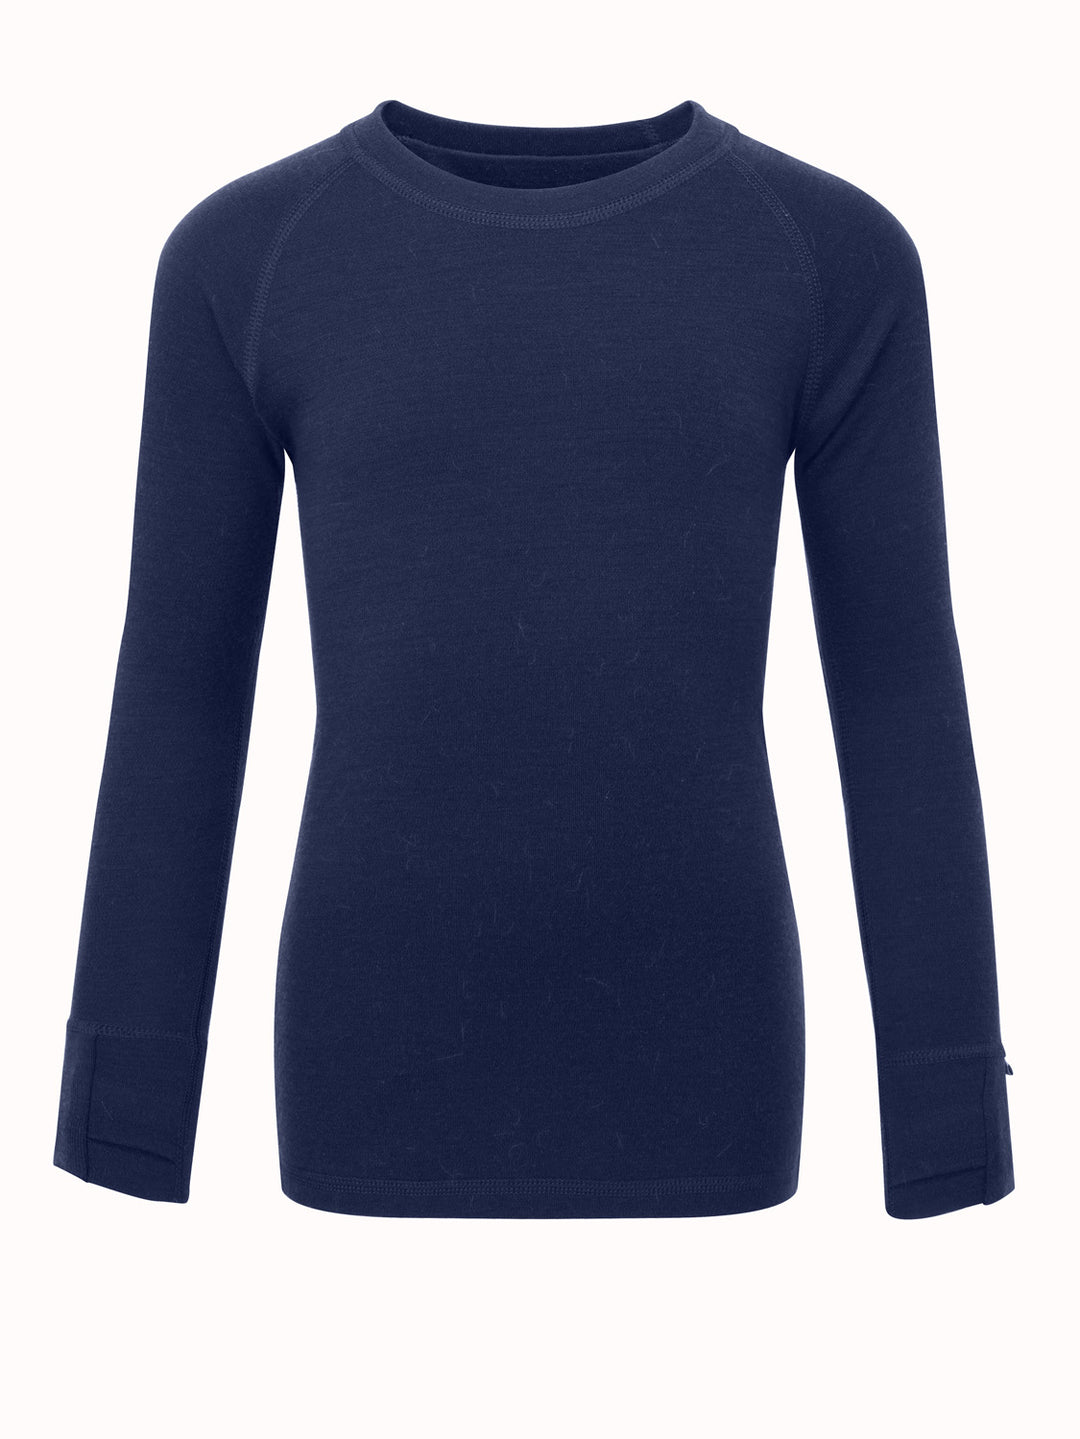 Merino Kids Base Layer Top, Products